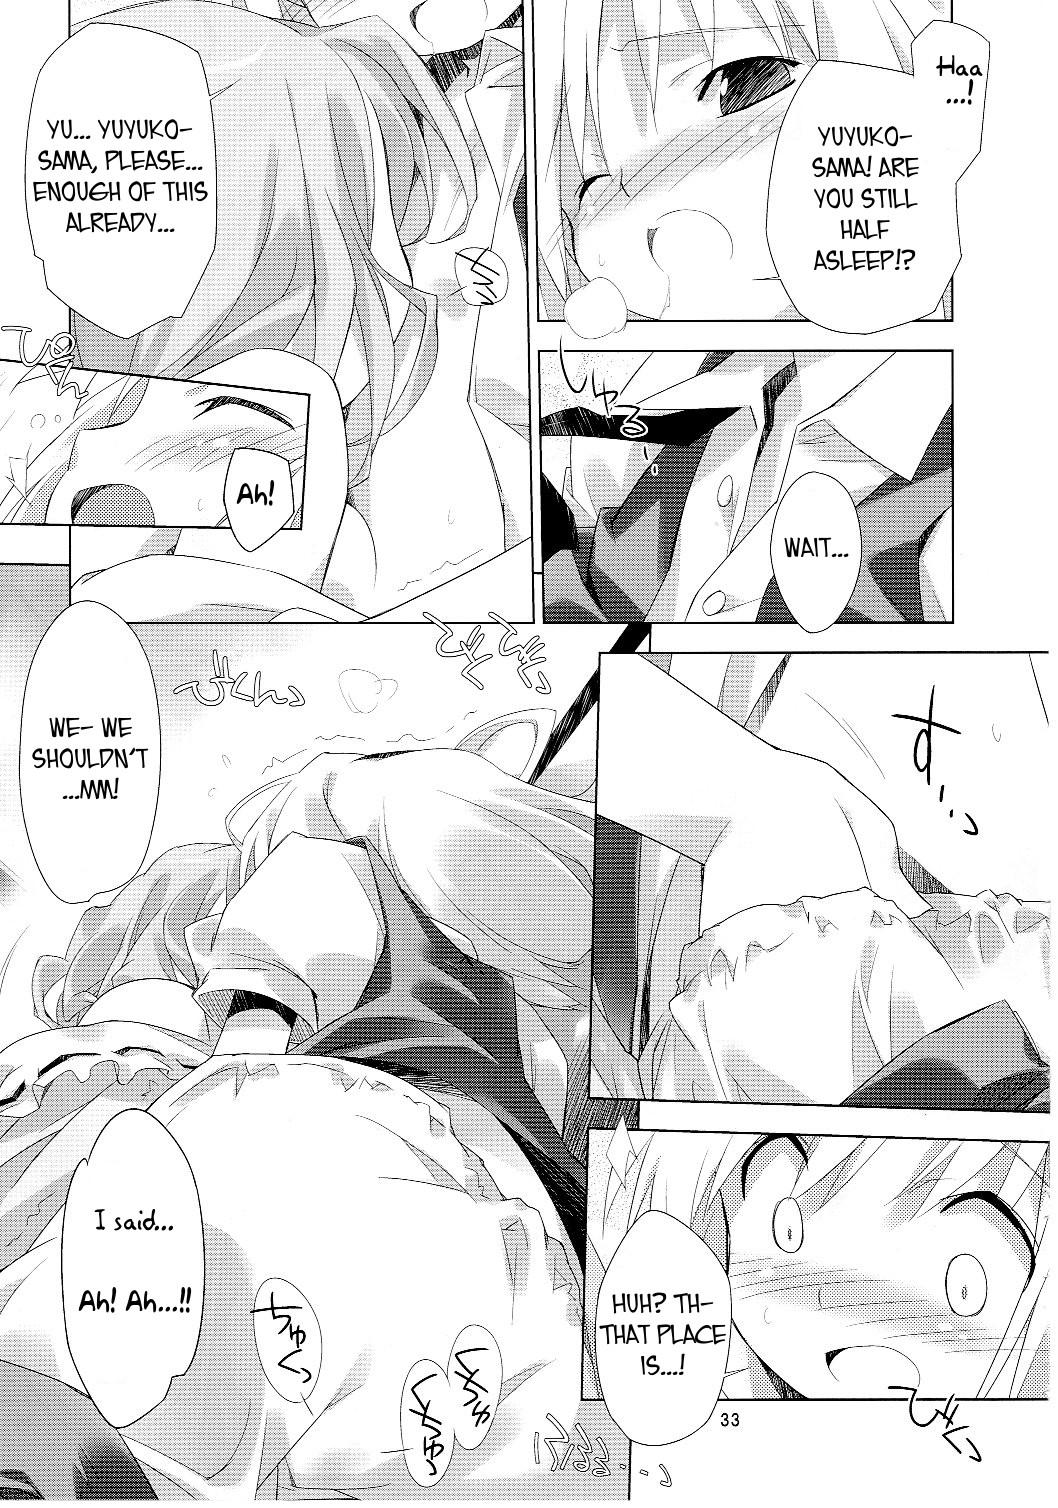 Gay Anal No Title - Touhou project Online - Page 3